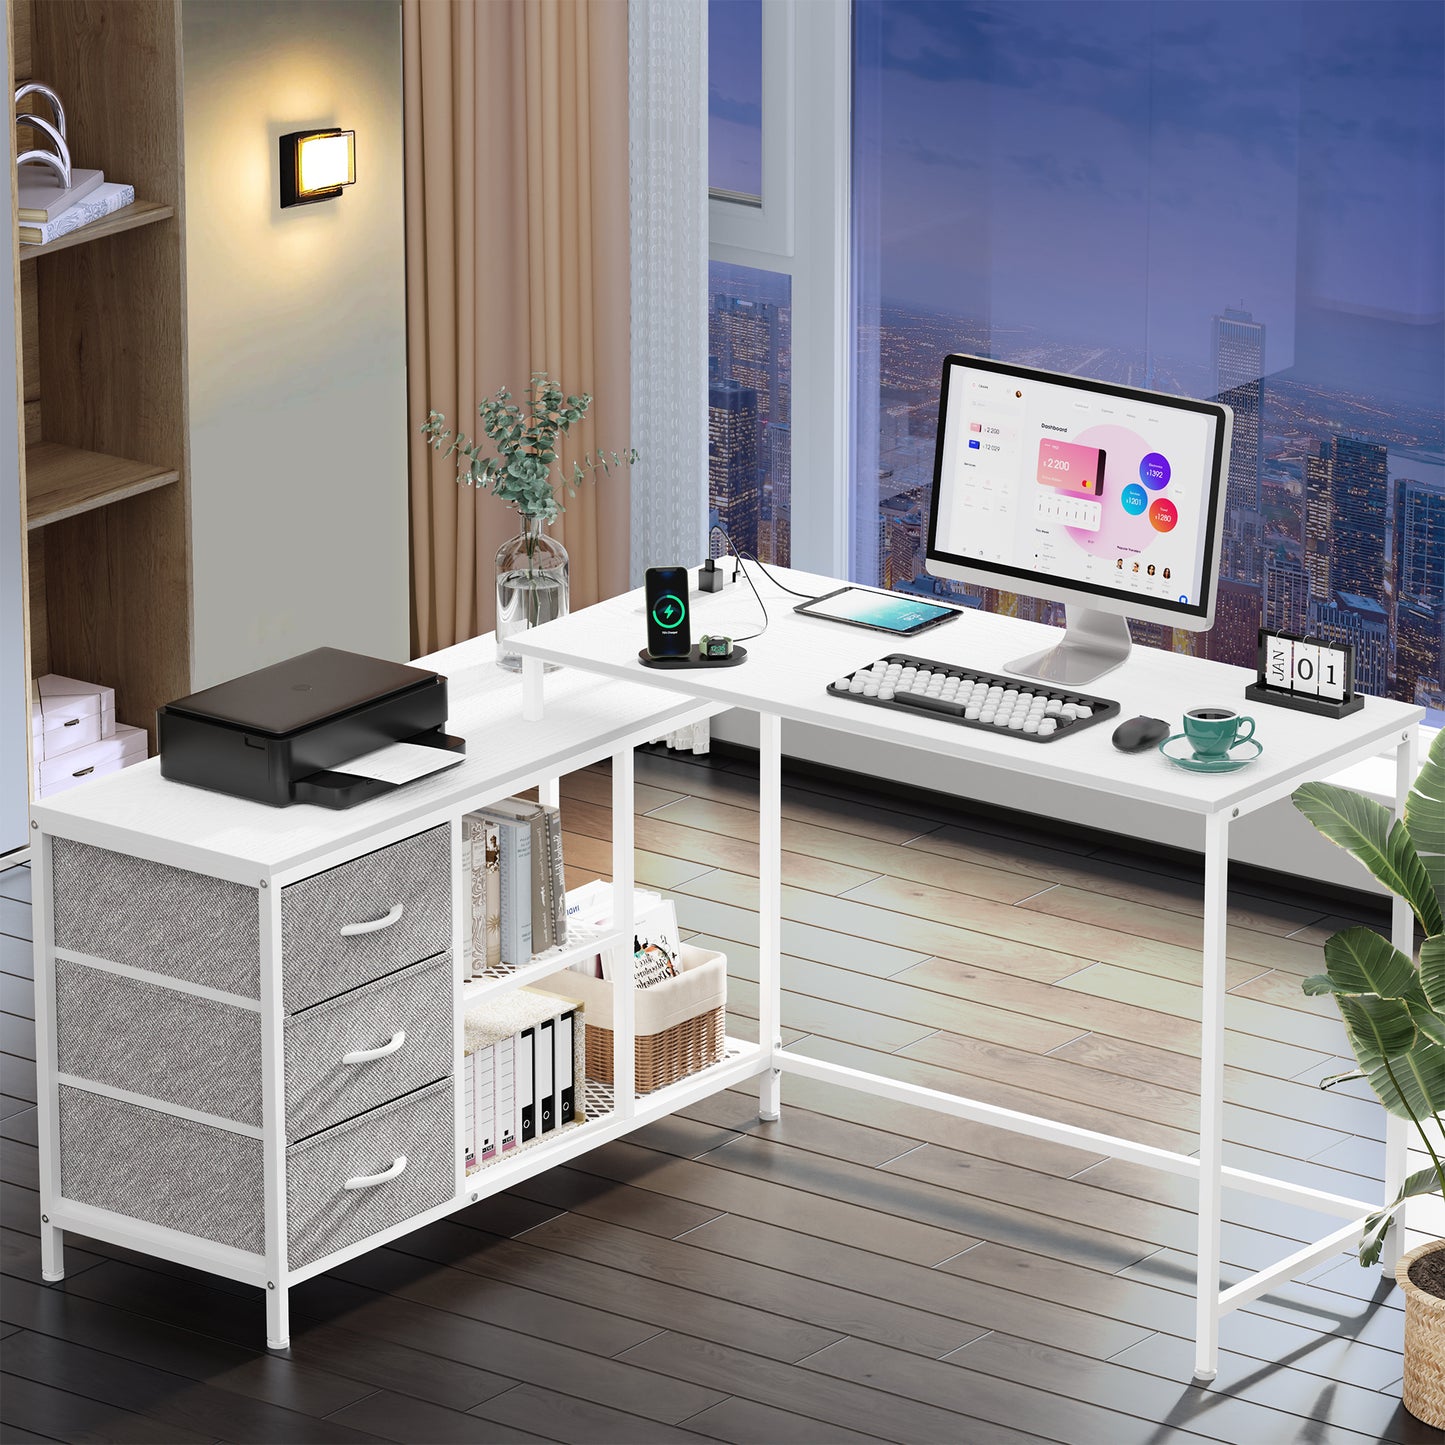 SUPERJARE L Shaped Desk with Power Outlets, Drawers & Shelves, White, 7944WC